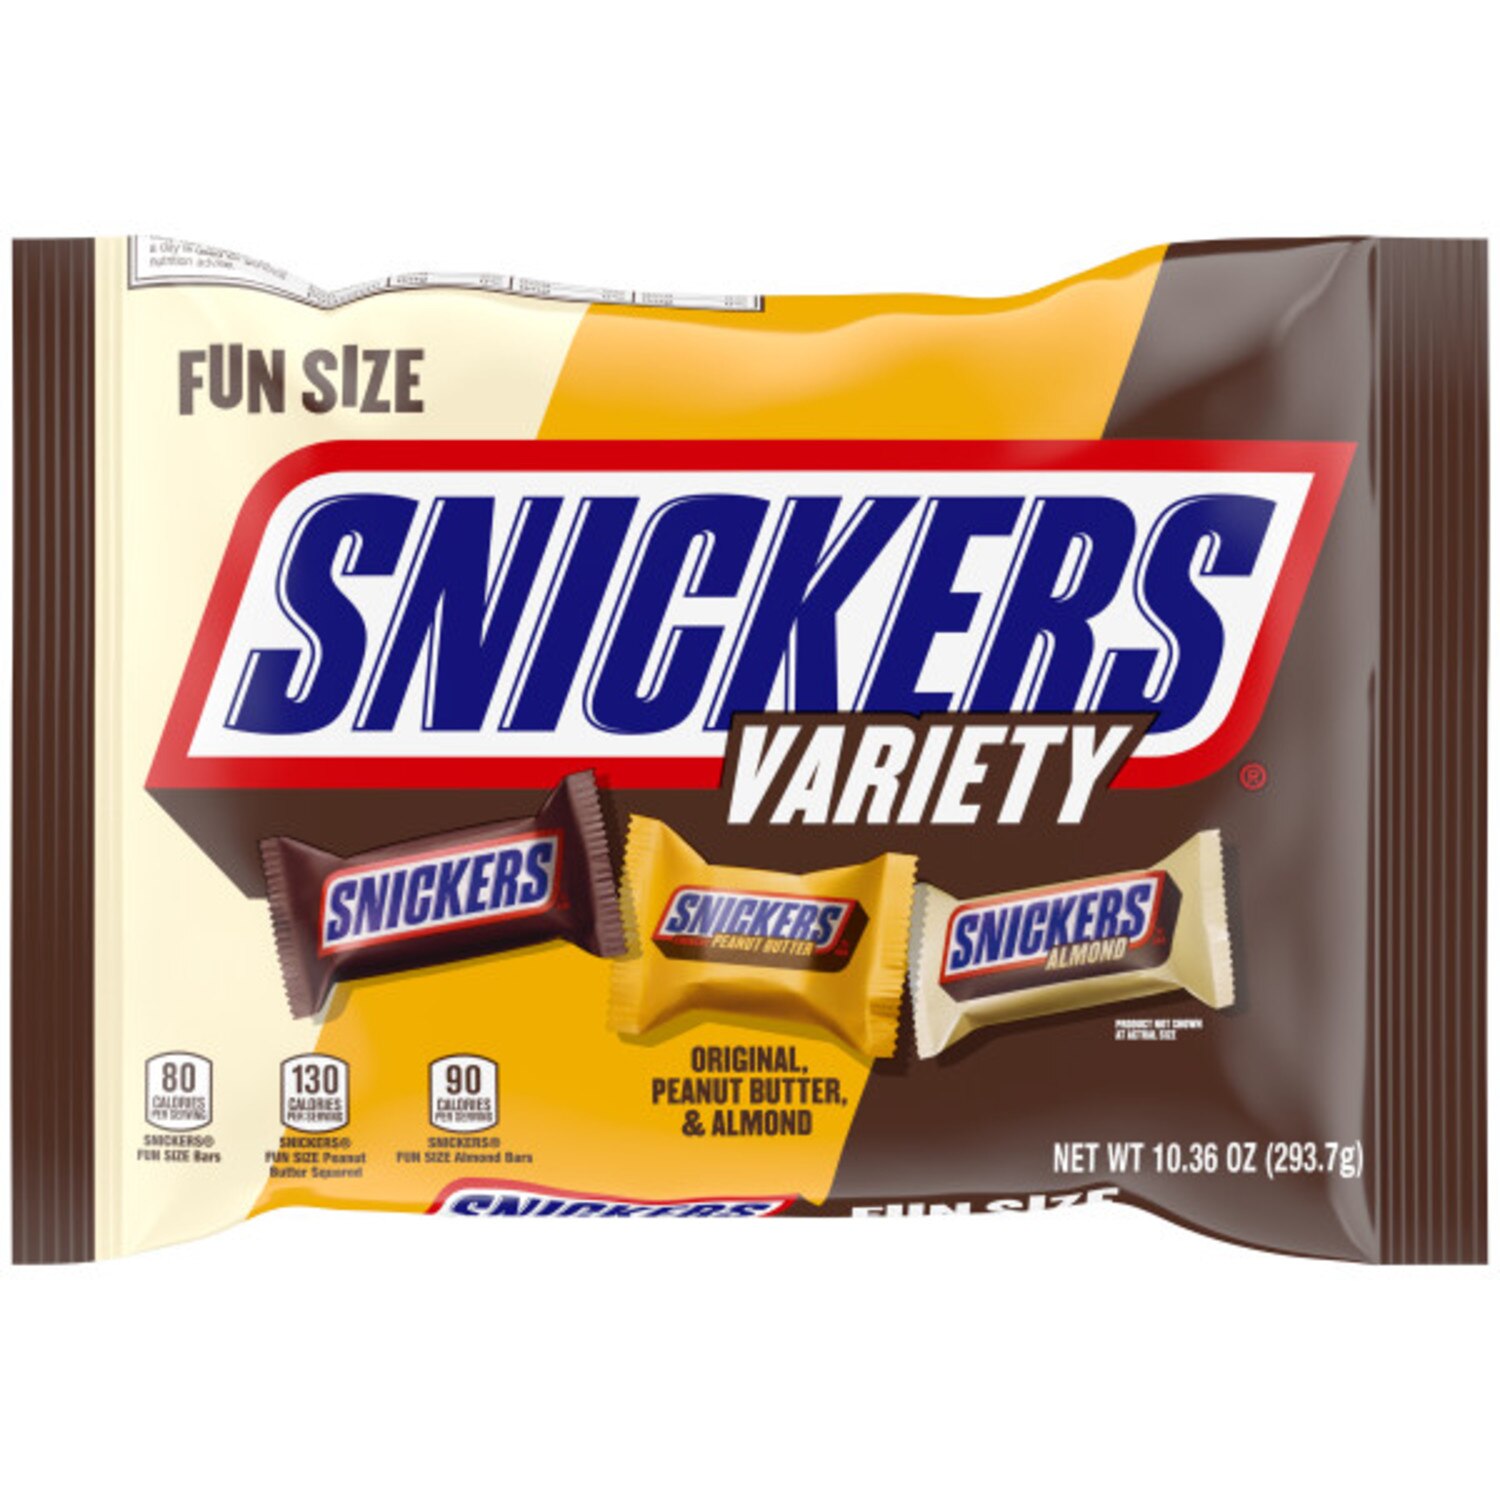 Snickers Fun Size Chocolate Bars Variety Mix Candy Bag, 10.36 Oz , CVS